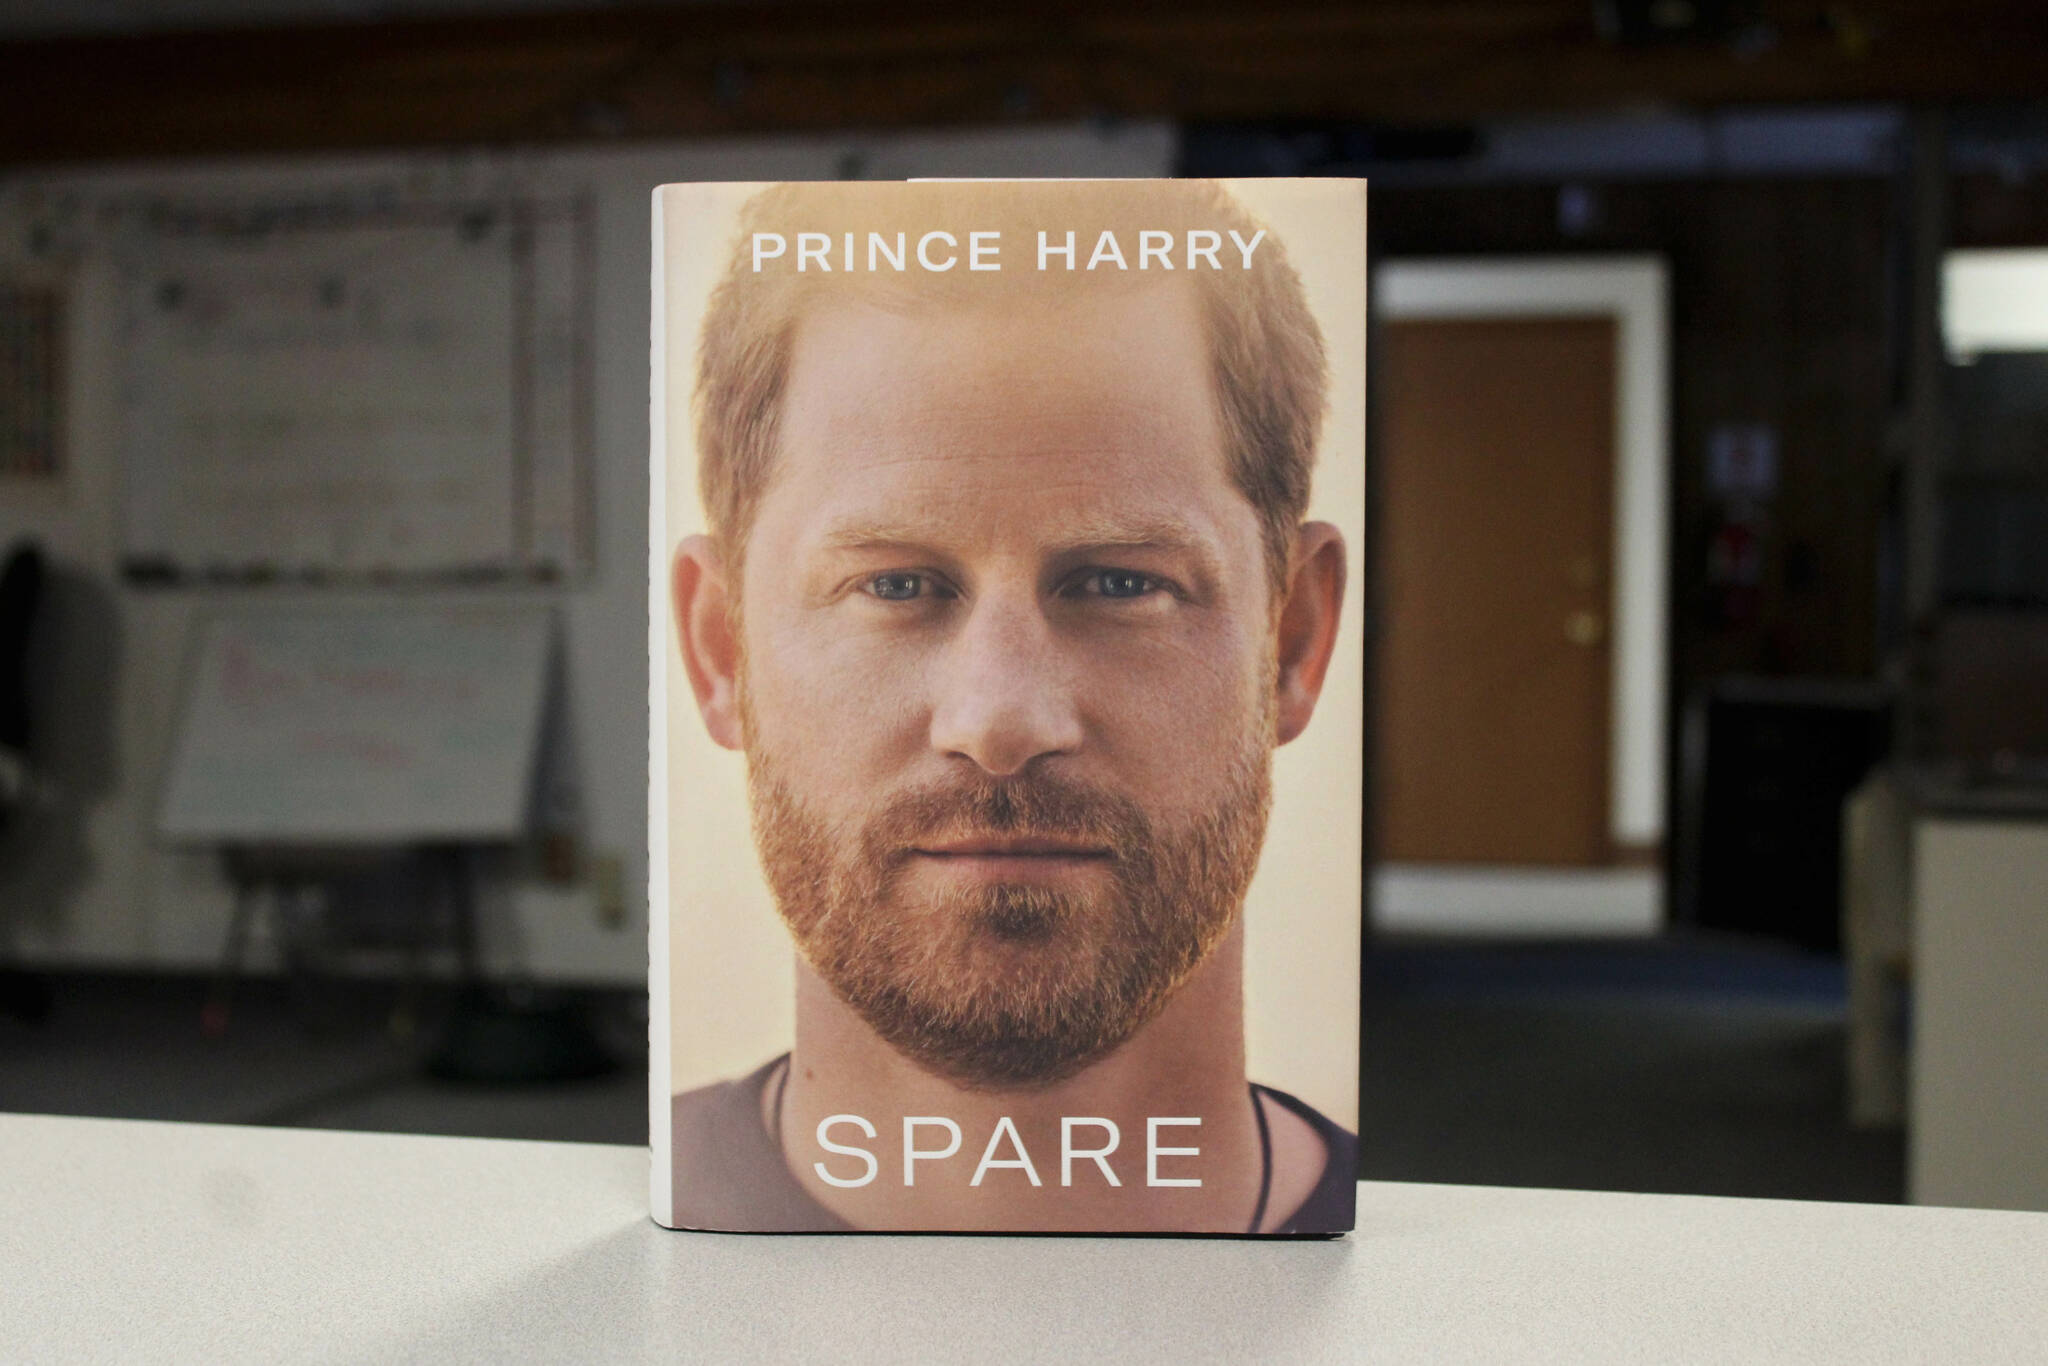 A copy of Prince Harry’s “Spare” sits on a desk in the Peninsula Clarion office on Tuesday, Jan. 24, 2023, in Kenai, Alaska. (Ashlyn O’Hara/Peninsula Clarion)